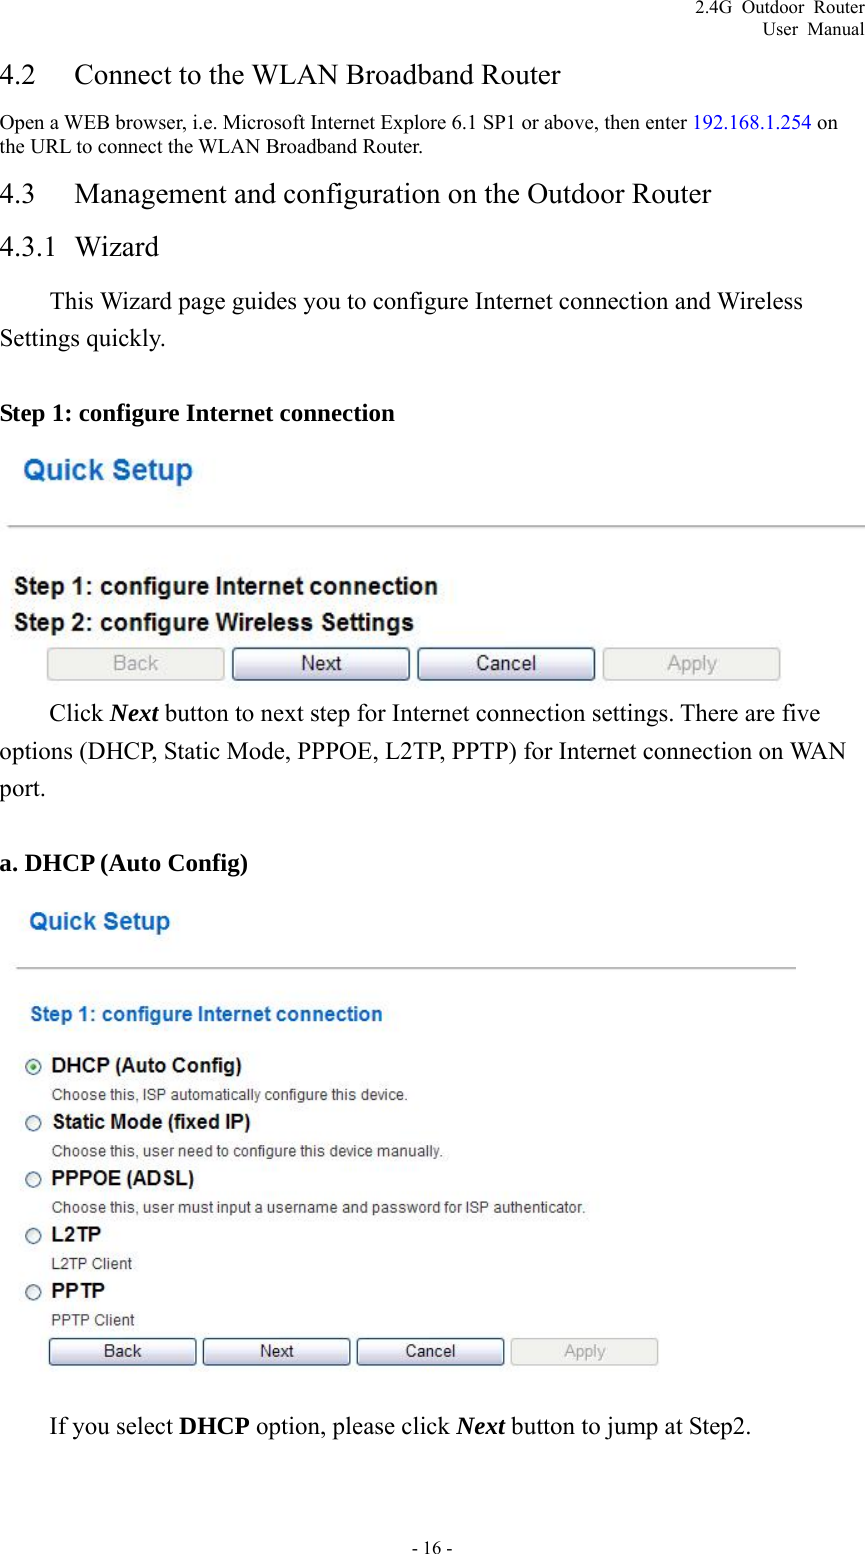 2.4G Outdoor Router User Manual 4.2 Connect to the WLAN Broadband Router Open a WEB browser, i.e. Microsoft Internet Explore 6.1 SP1 or above, then enter 192.168.1.254 on the URL to connect the WLAN Broadband Router. 4.3 Management and configuration on the Outdoor Router 4.3.1 Wizard This Wizard page guides you to configure Internet connection and Wireless Settings quickly.  Step 1: configure Internet connection   Click Next button to next step for Internet connection settings. There are five options (DHCP, Static Mode, PPPOE, L2TP, PPTP) for Internet connection on WAN port.  a. DHCP (Auto Config)    If you select DHCP option, please click Next button to jump at Step2.  - 16 - 